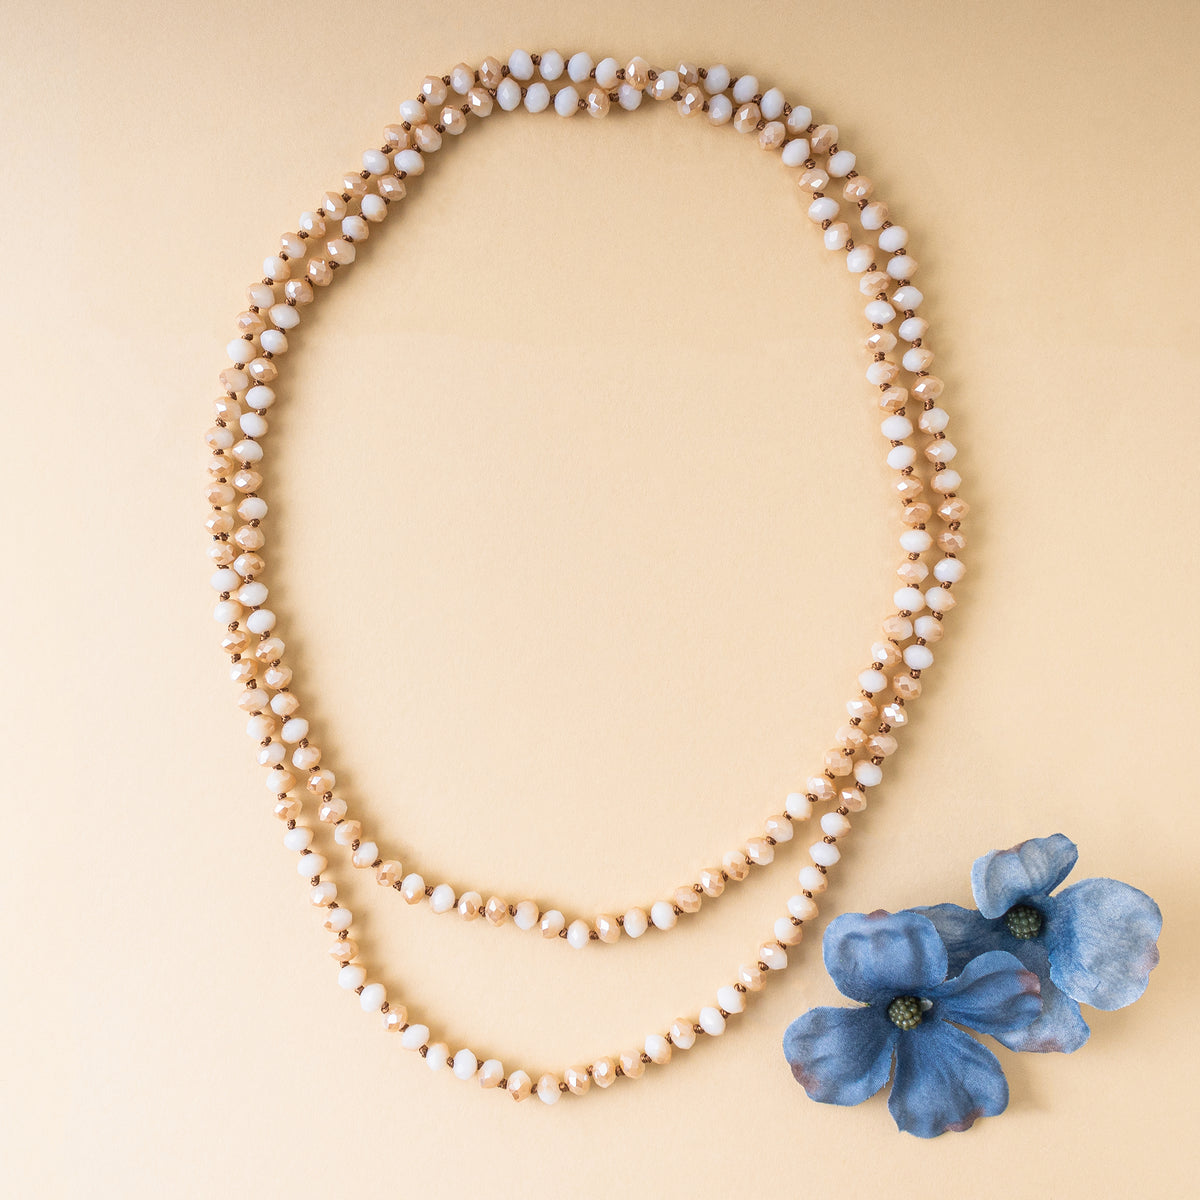 72028-13 - Beaded Necklace - Beige AB